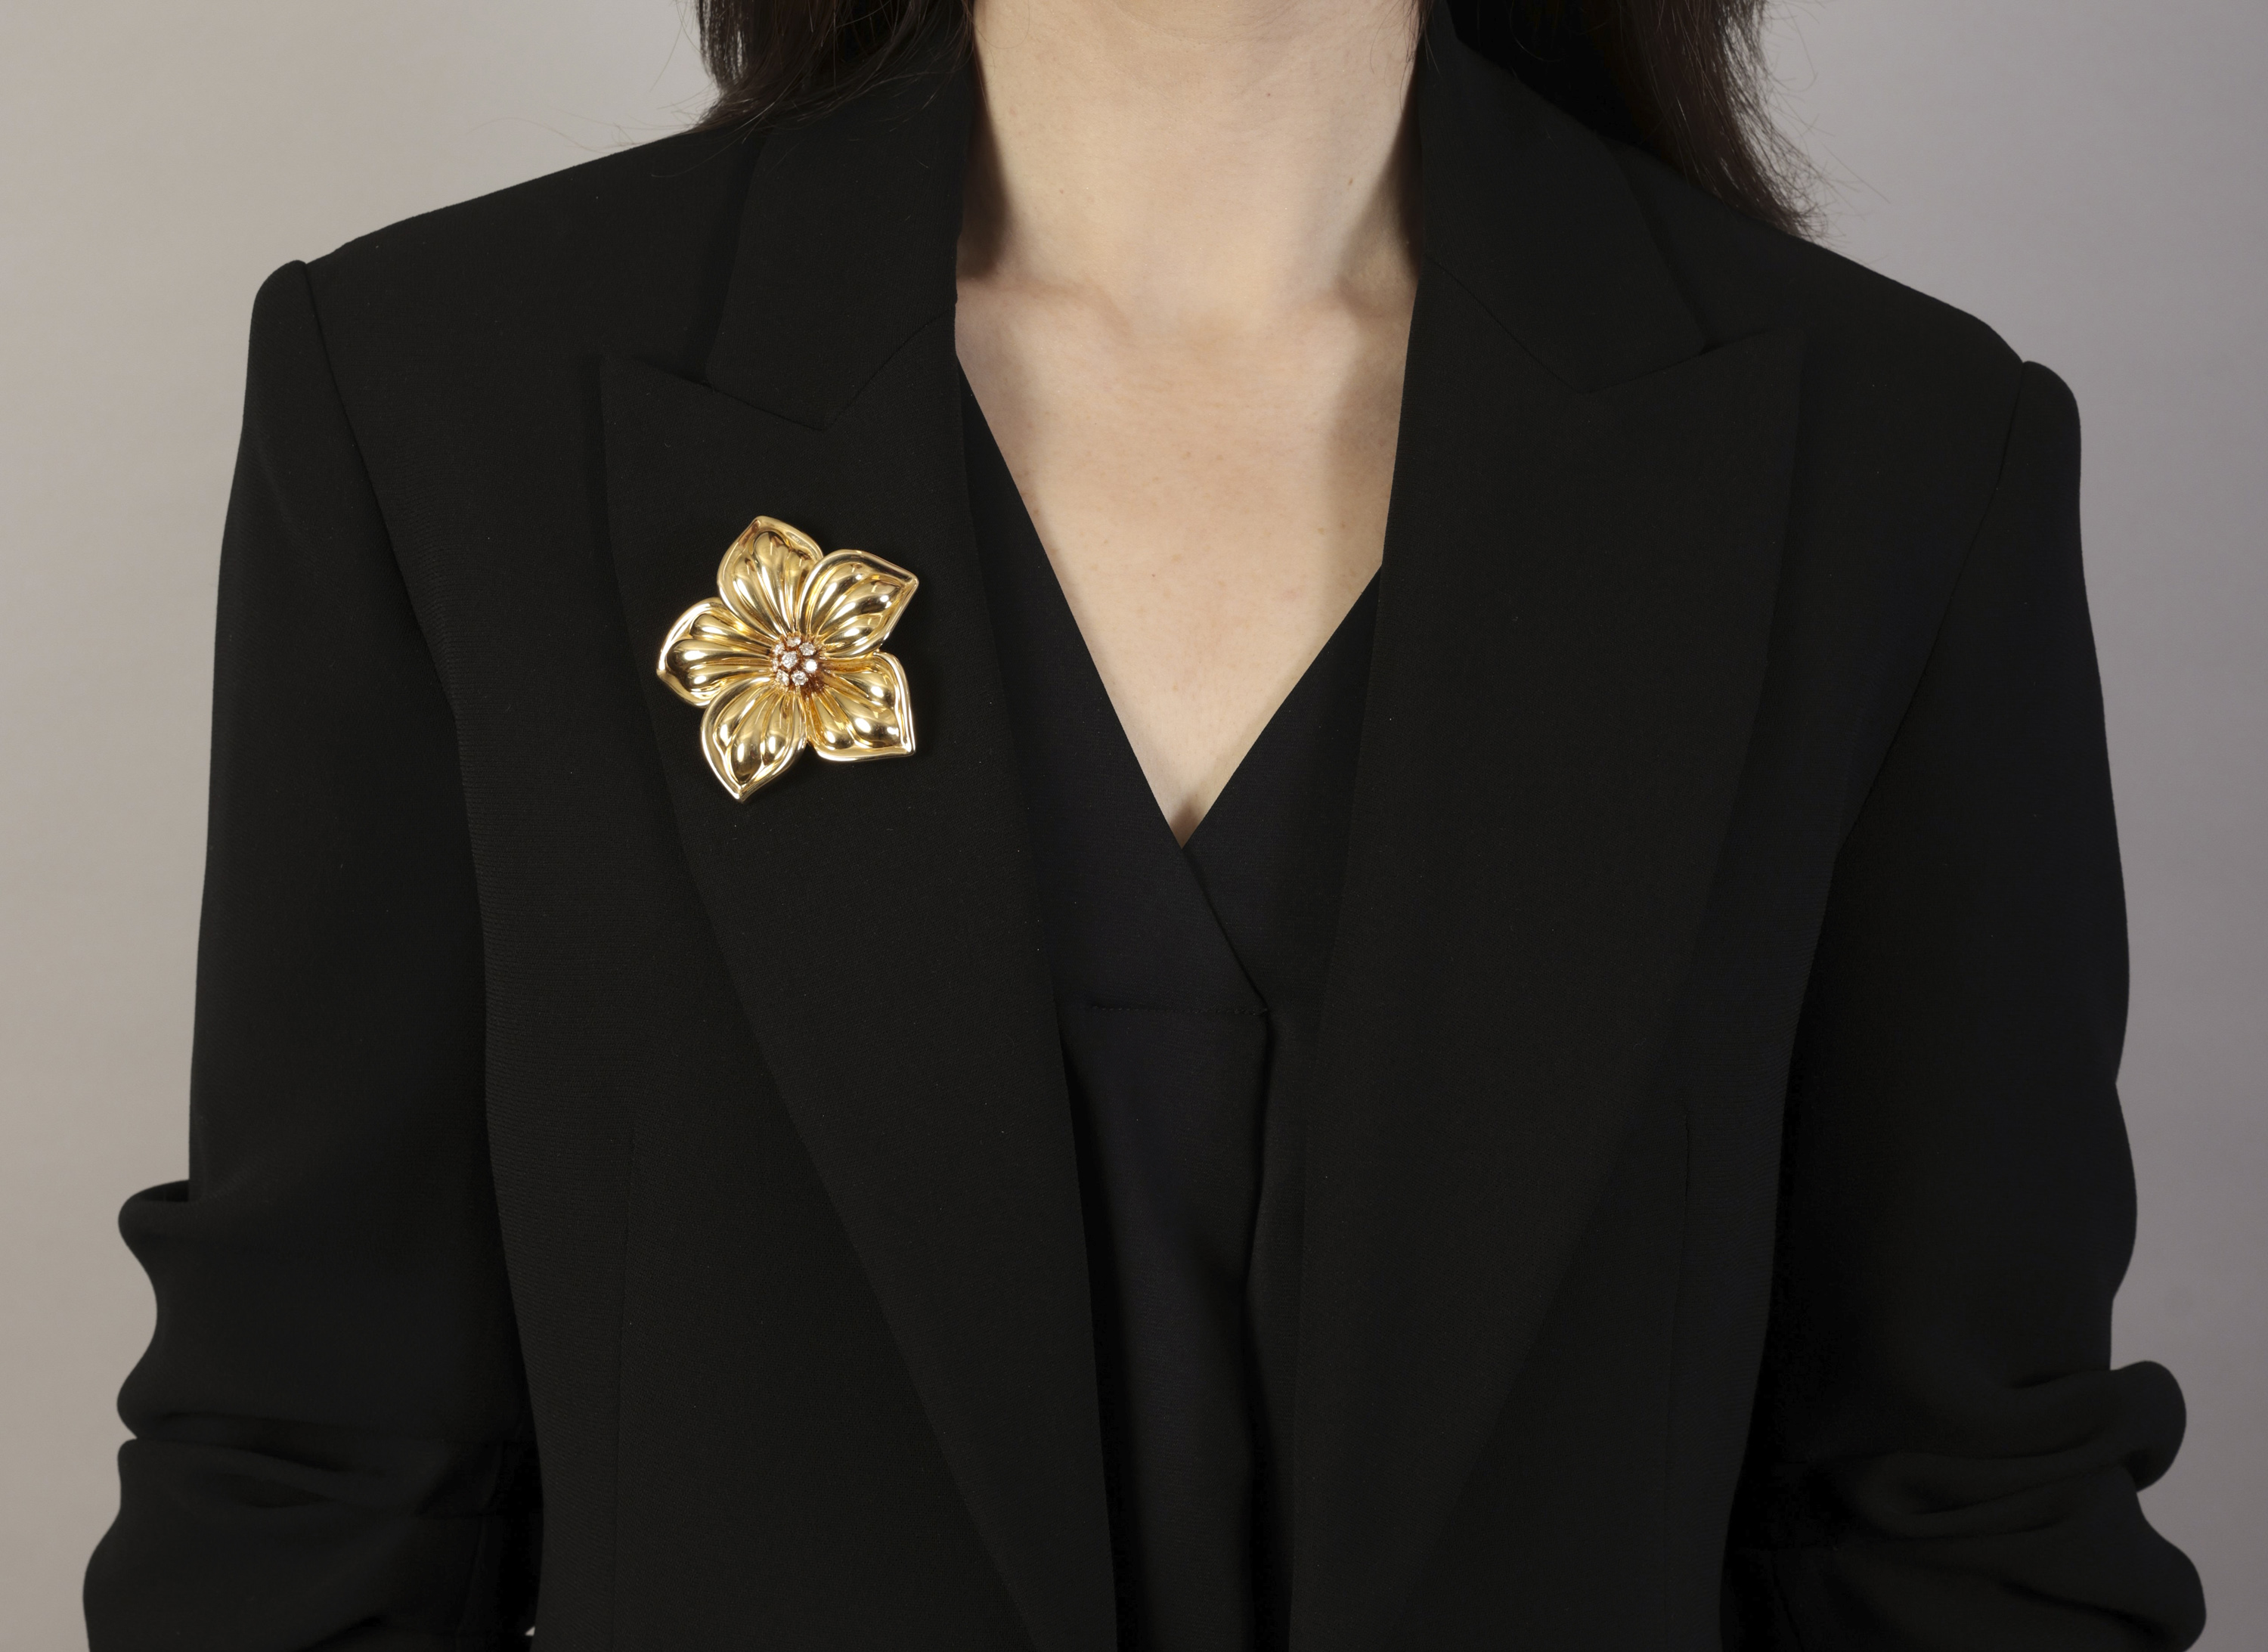 A DIAMOND 'DIANA' BROOCH, BY VAN CLEEF & ARPELS, CIRCA 1990 Designed as a sculpted flowerhead, the - Image 3 of 5